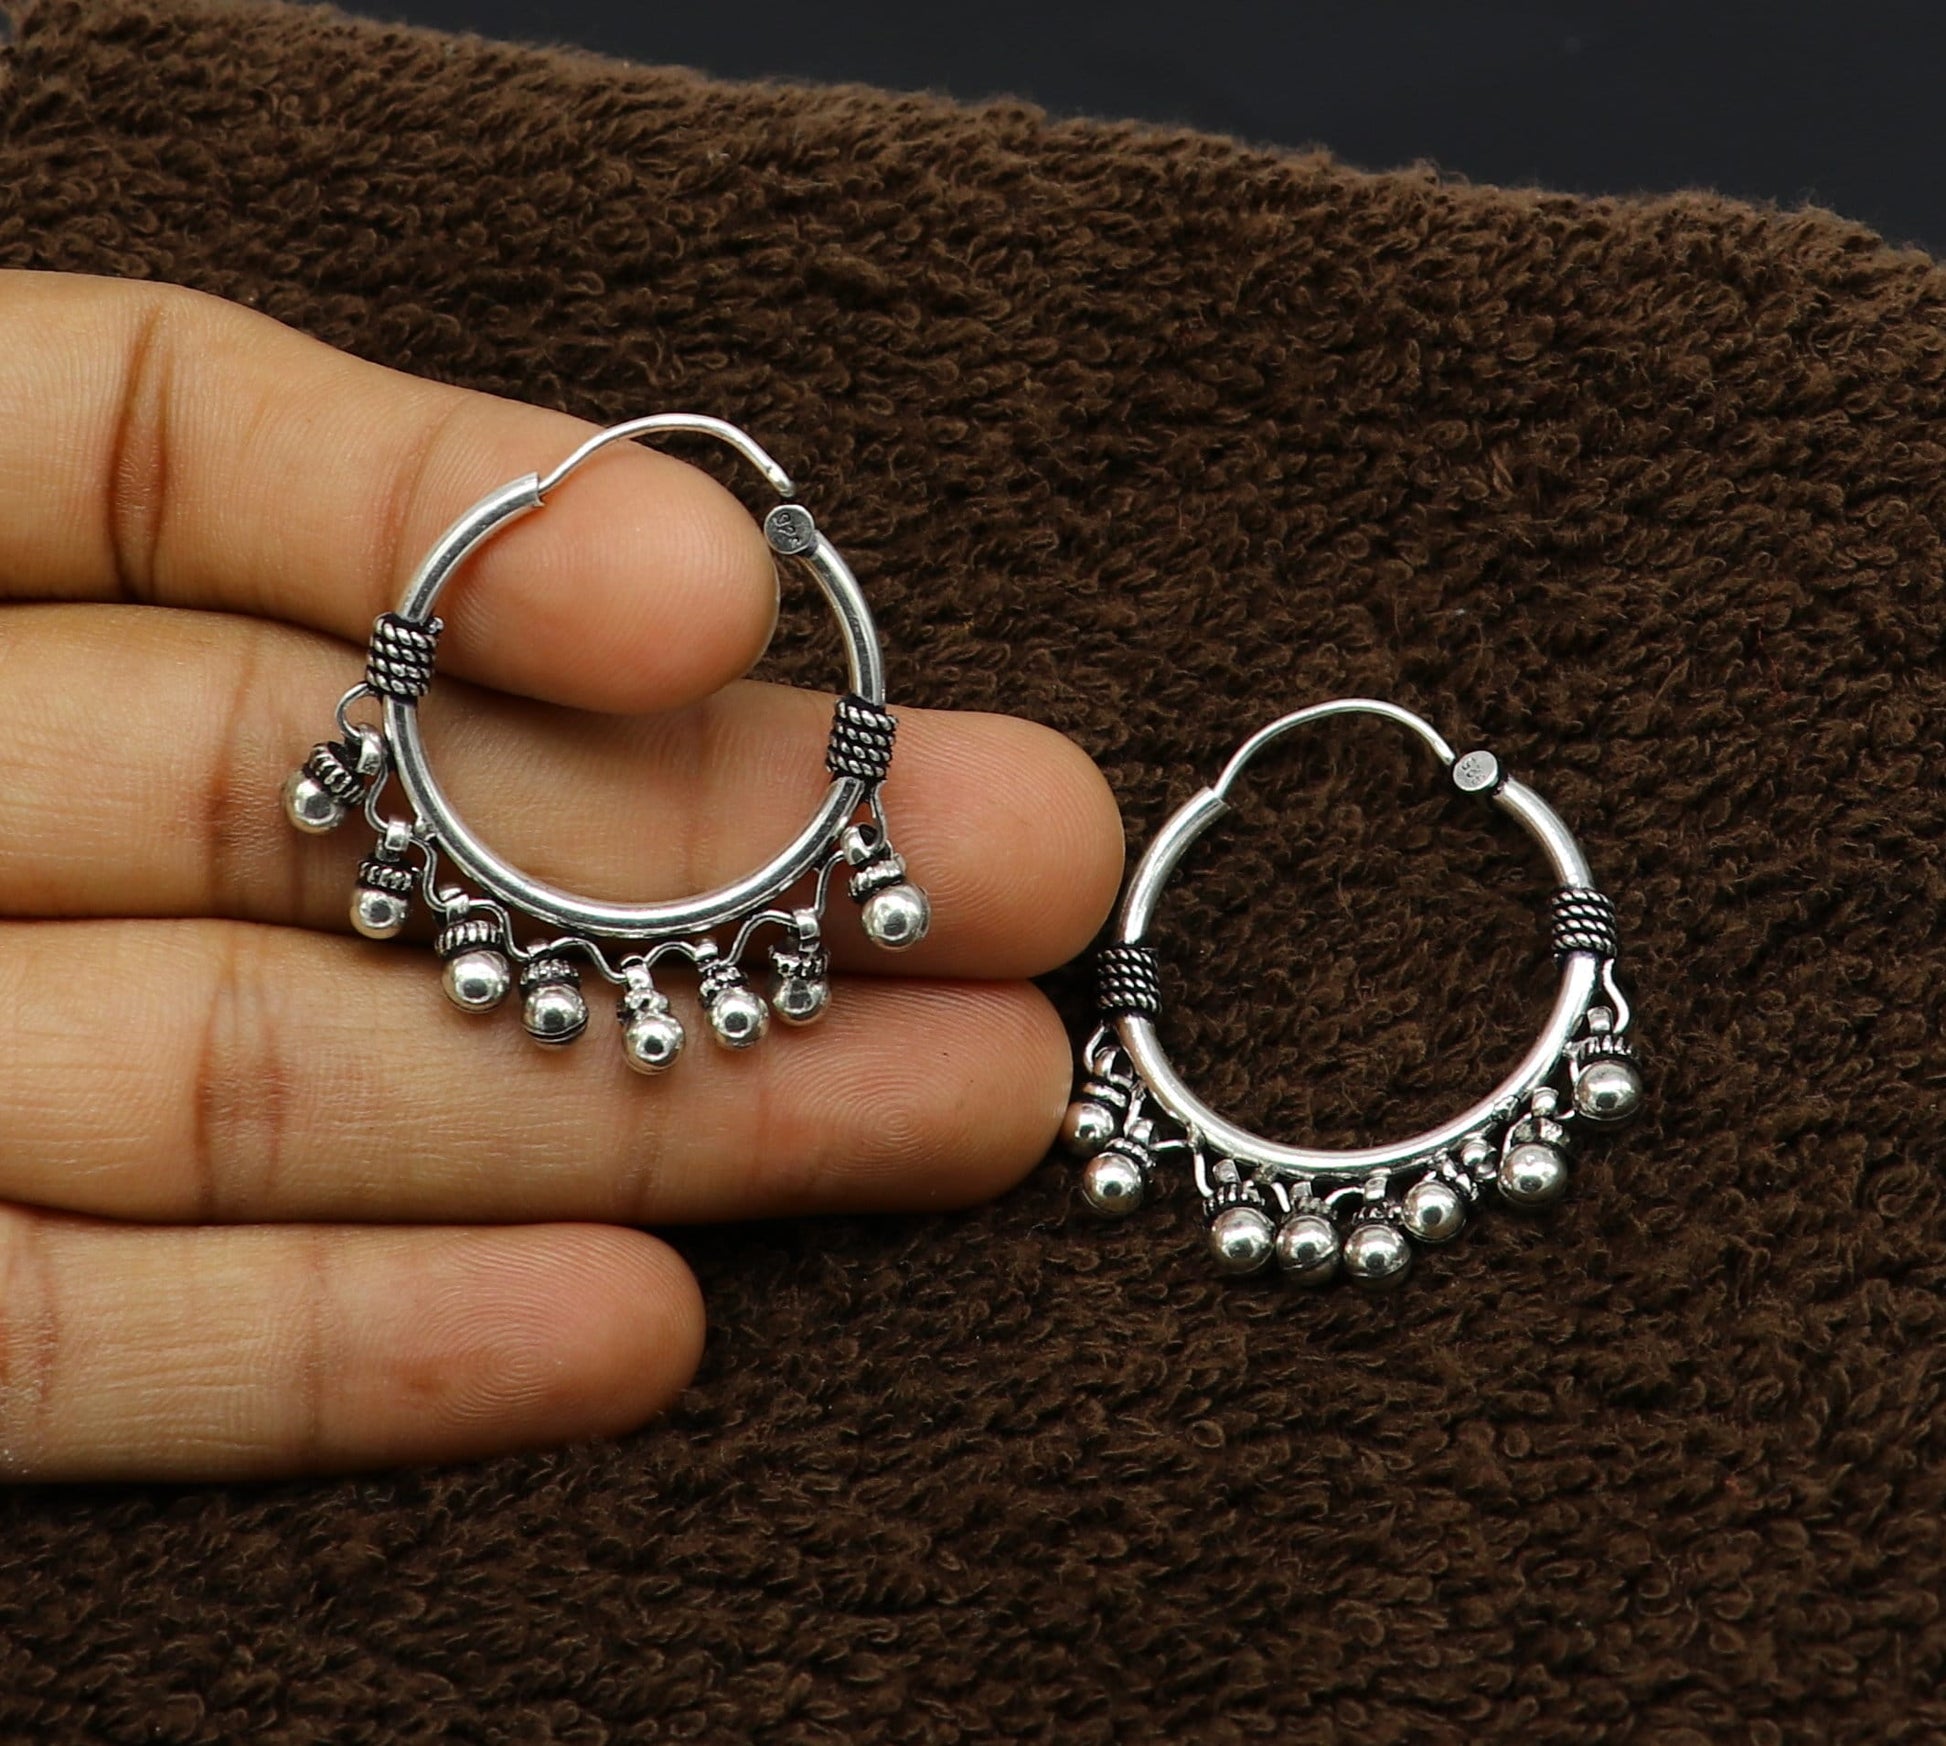 Genuine 925 Sterling silver handmade fabulous hoops earrings with hanging bells amazing antique earrings jewelry for girl's ear545 - TRIBAL ORNAMENTS